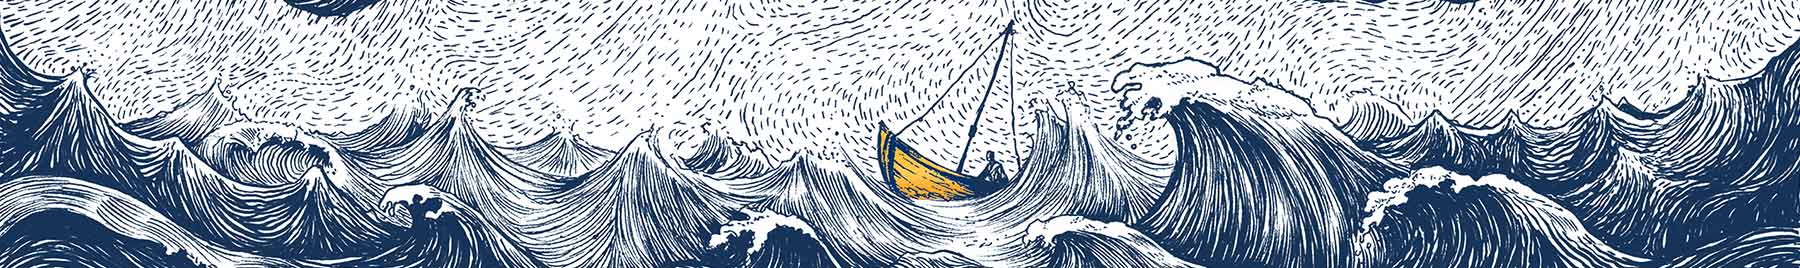 ink drawing of a small yellow boat on a stormy sea